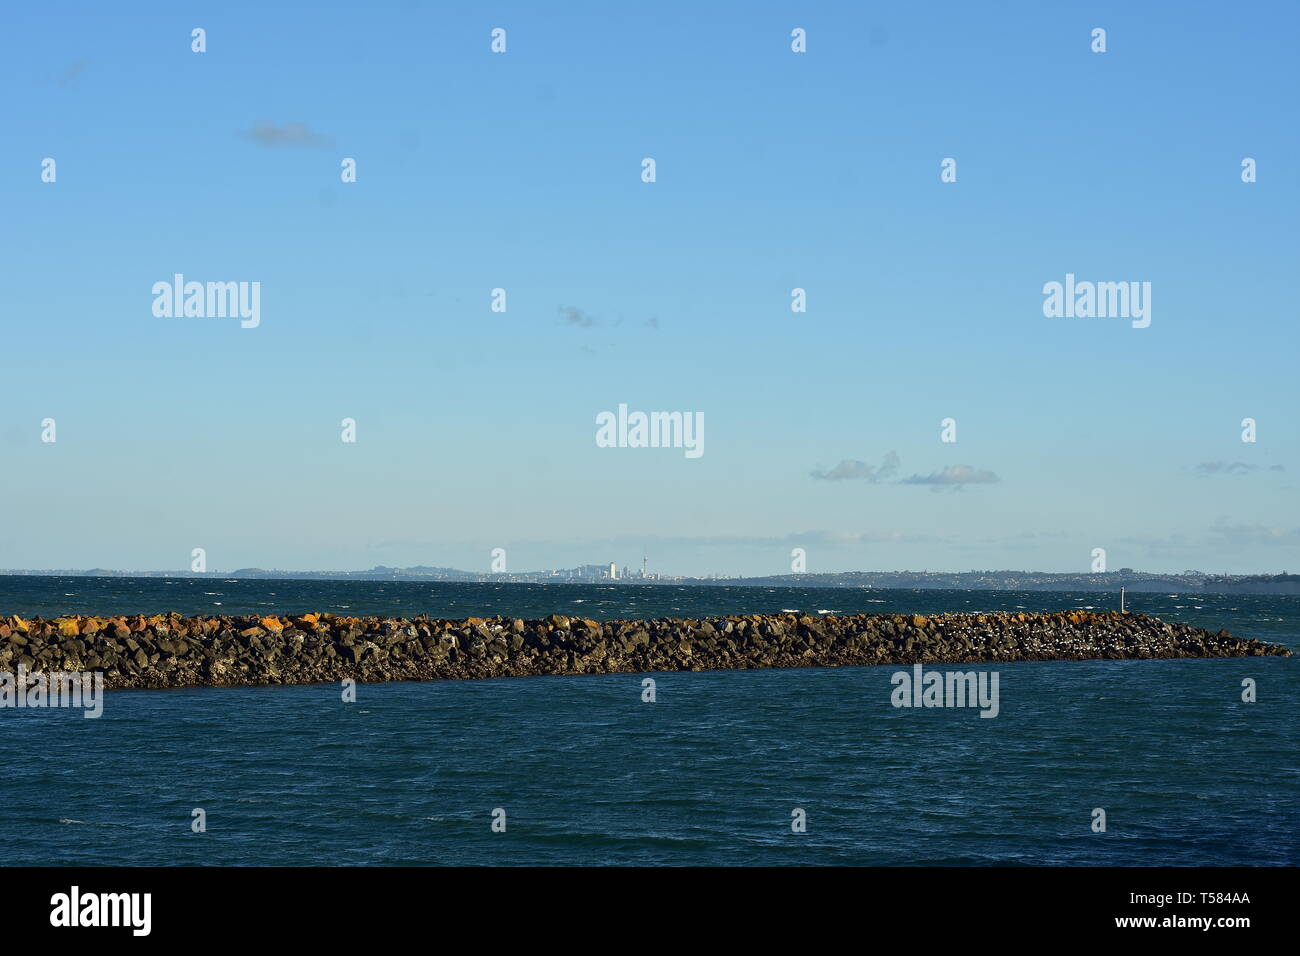 Breakwall of free laid stones surrounded by dark choppy sea with Auckland cityscape in distant background. Stock Photo